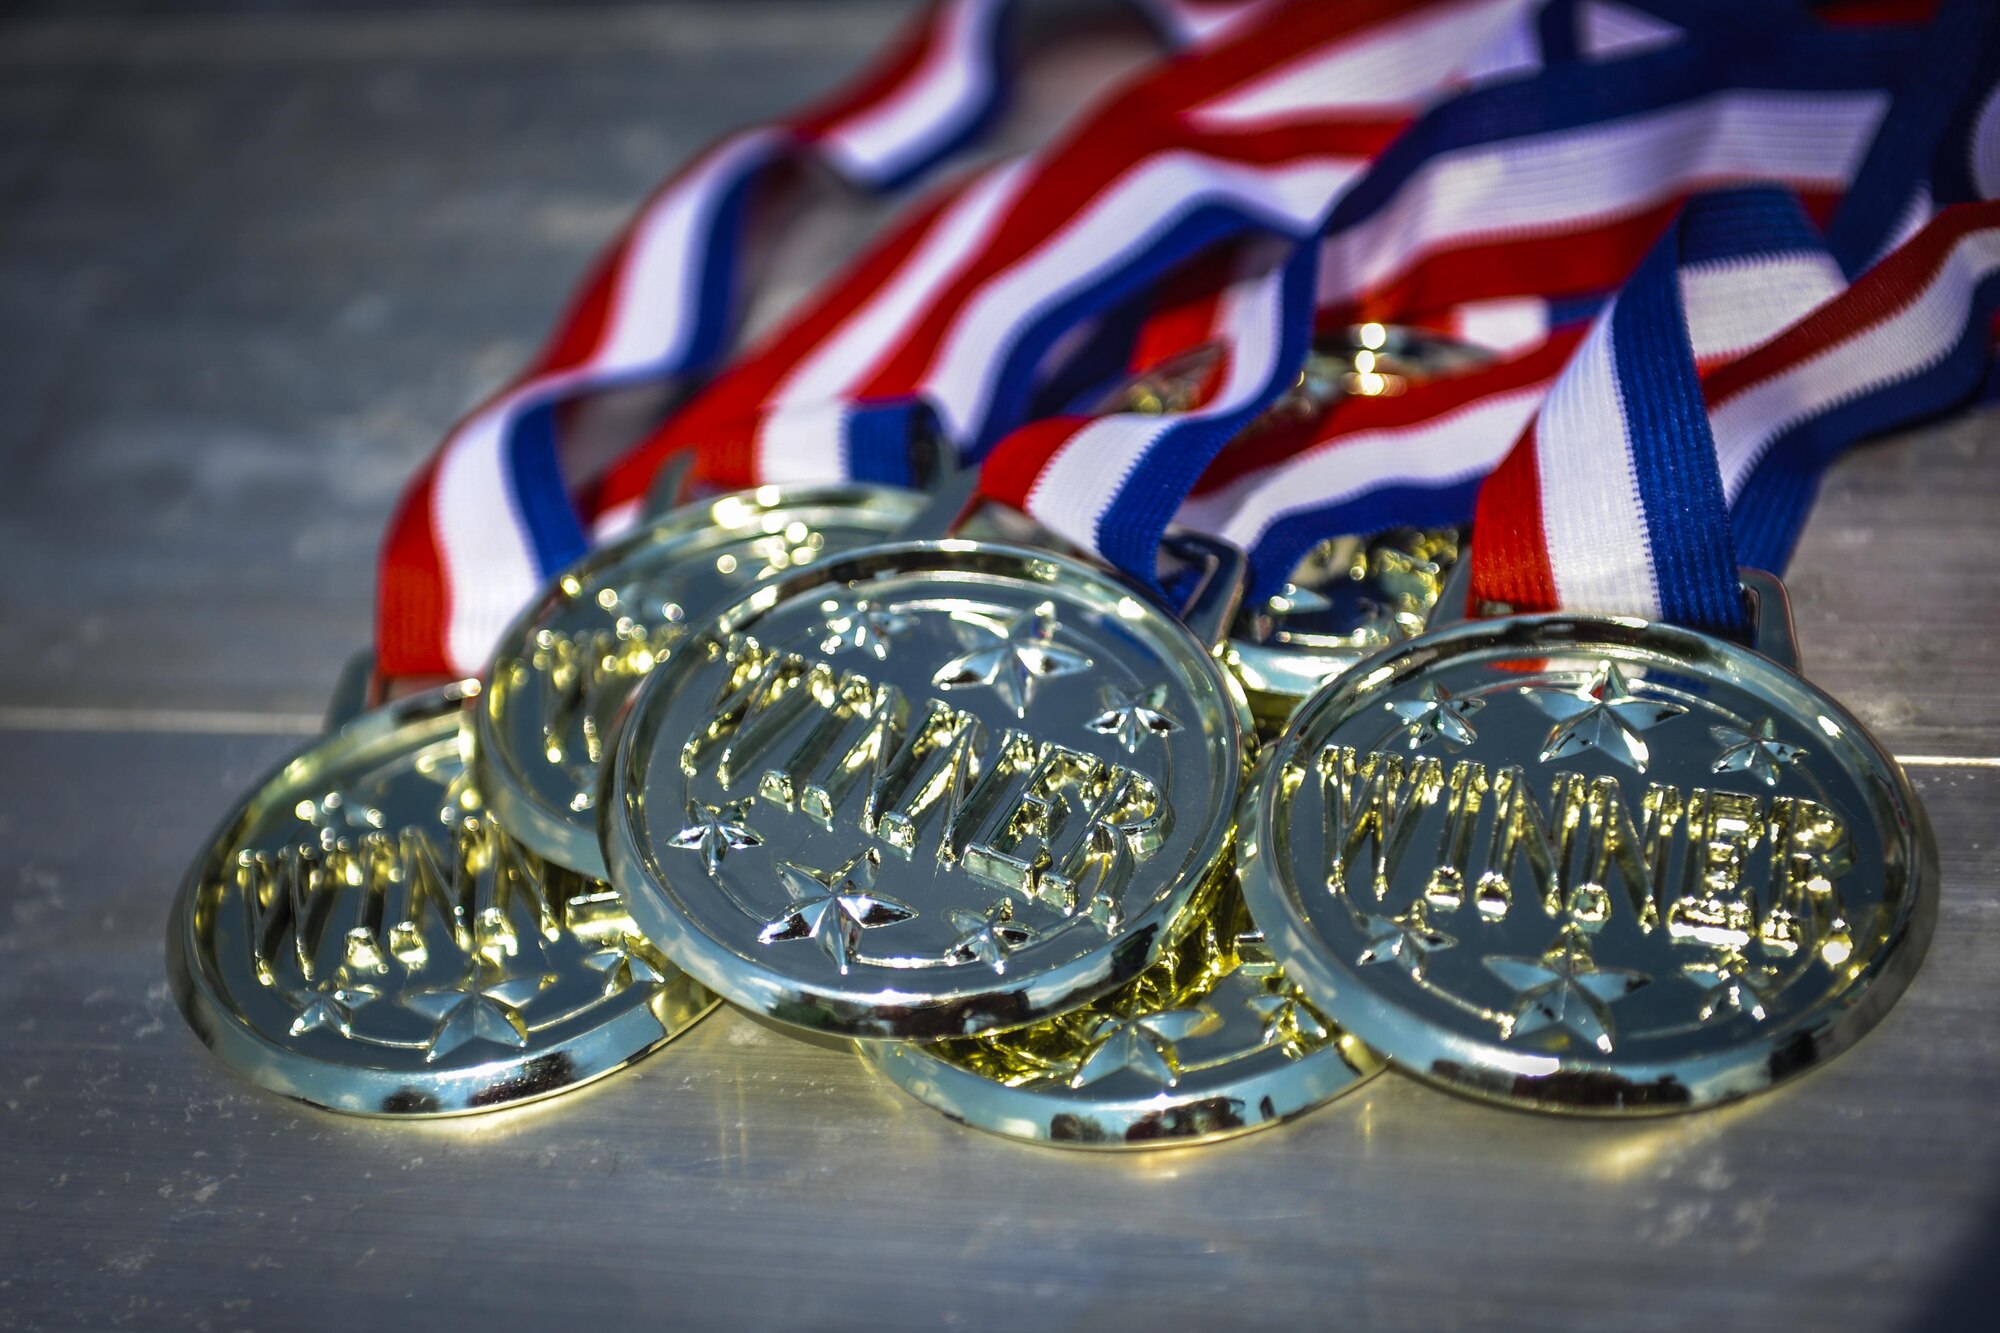 Medals sit on a table at the Green Dot Olympics on Hurlburt Field, Fla., Sept. 28, 2016. The winning team, the 1st Special Operations Logistics Readiness Squadron, won gold medals after defeating other competitors during the event. (U.S. Air Force photo by Airman Dennis Spain)